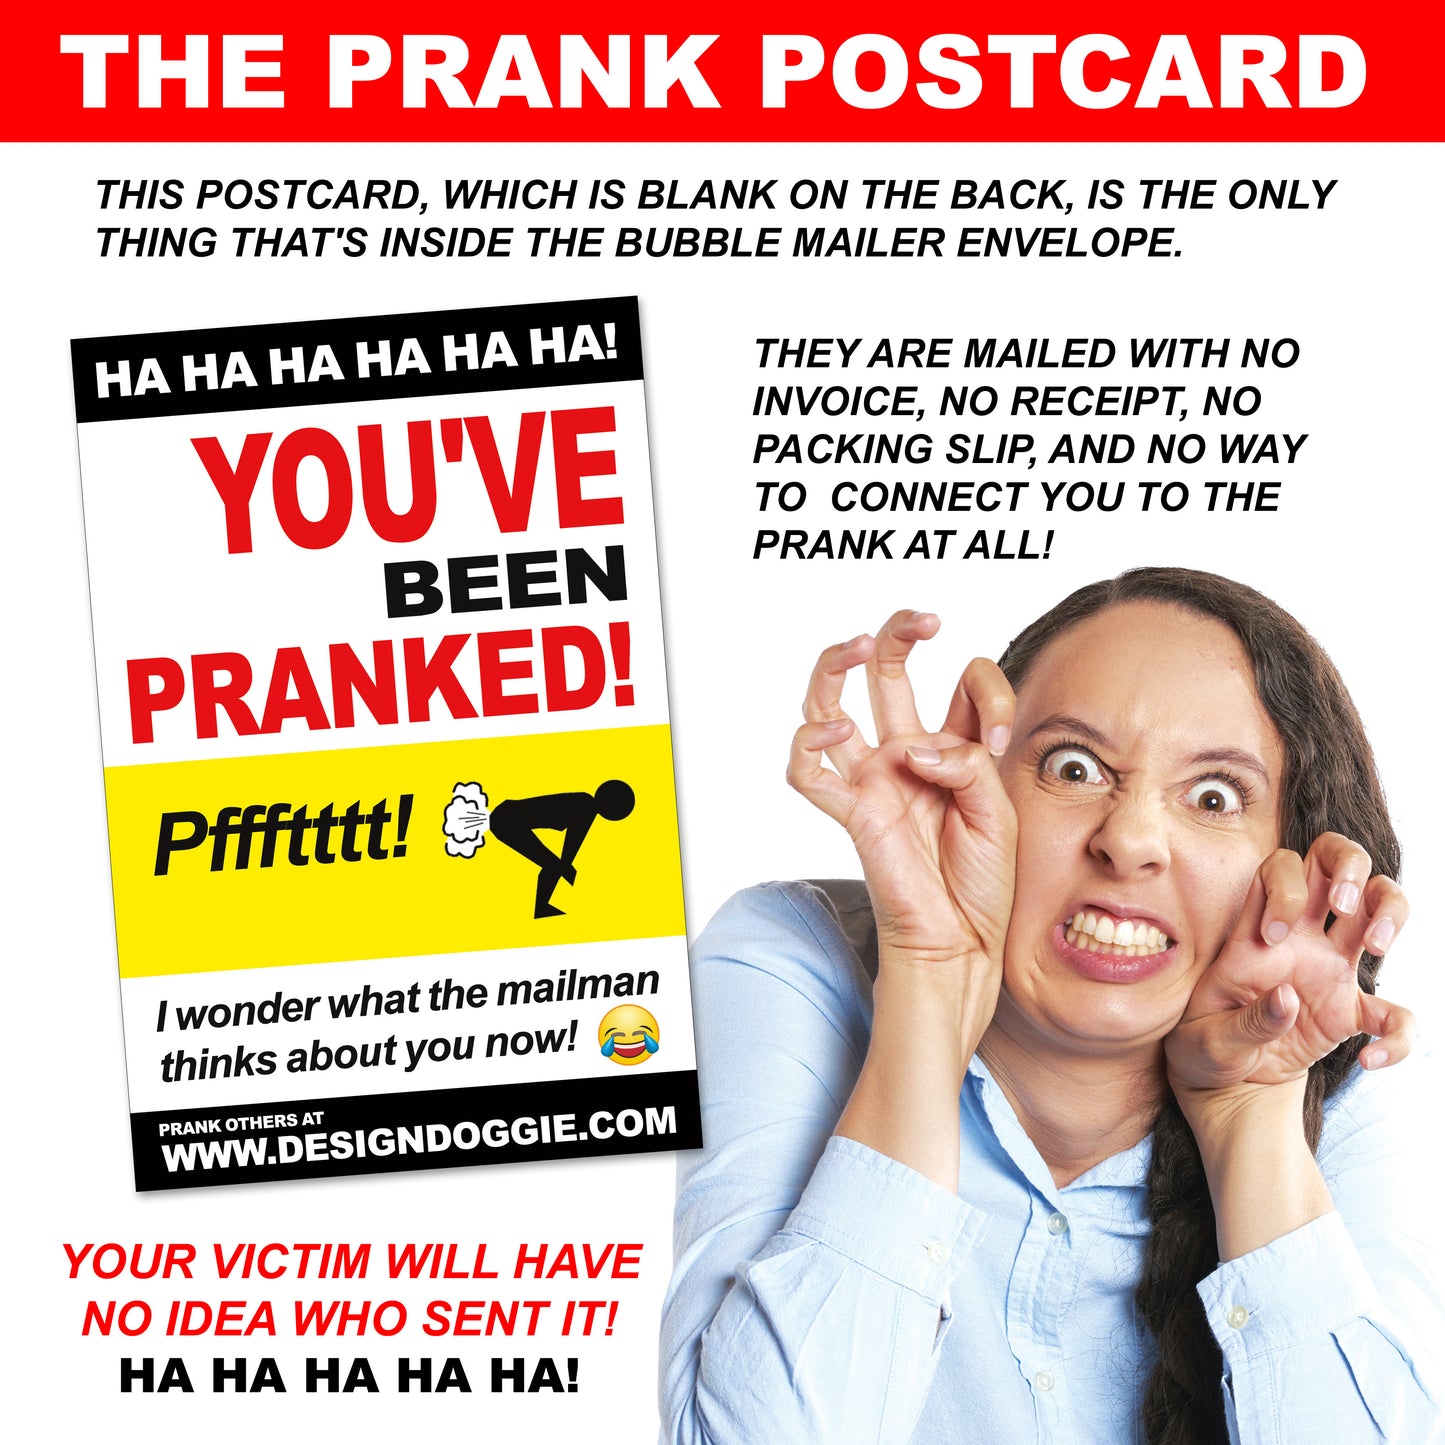 Big Dick Energy embarrassing prank envelope gets mailed directly to your victims 100% anonymously!